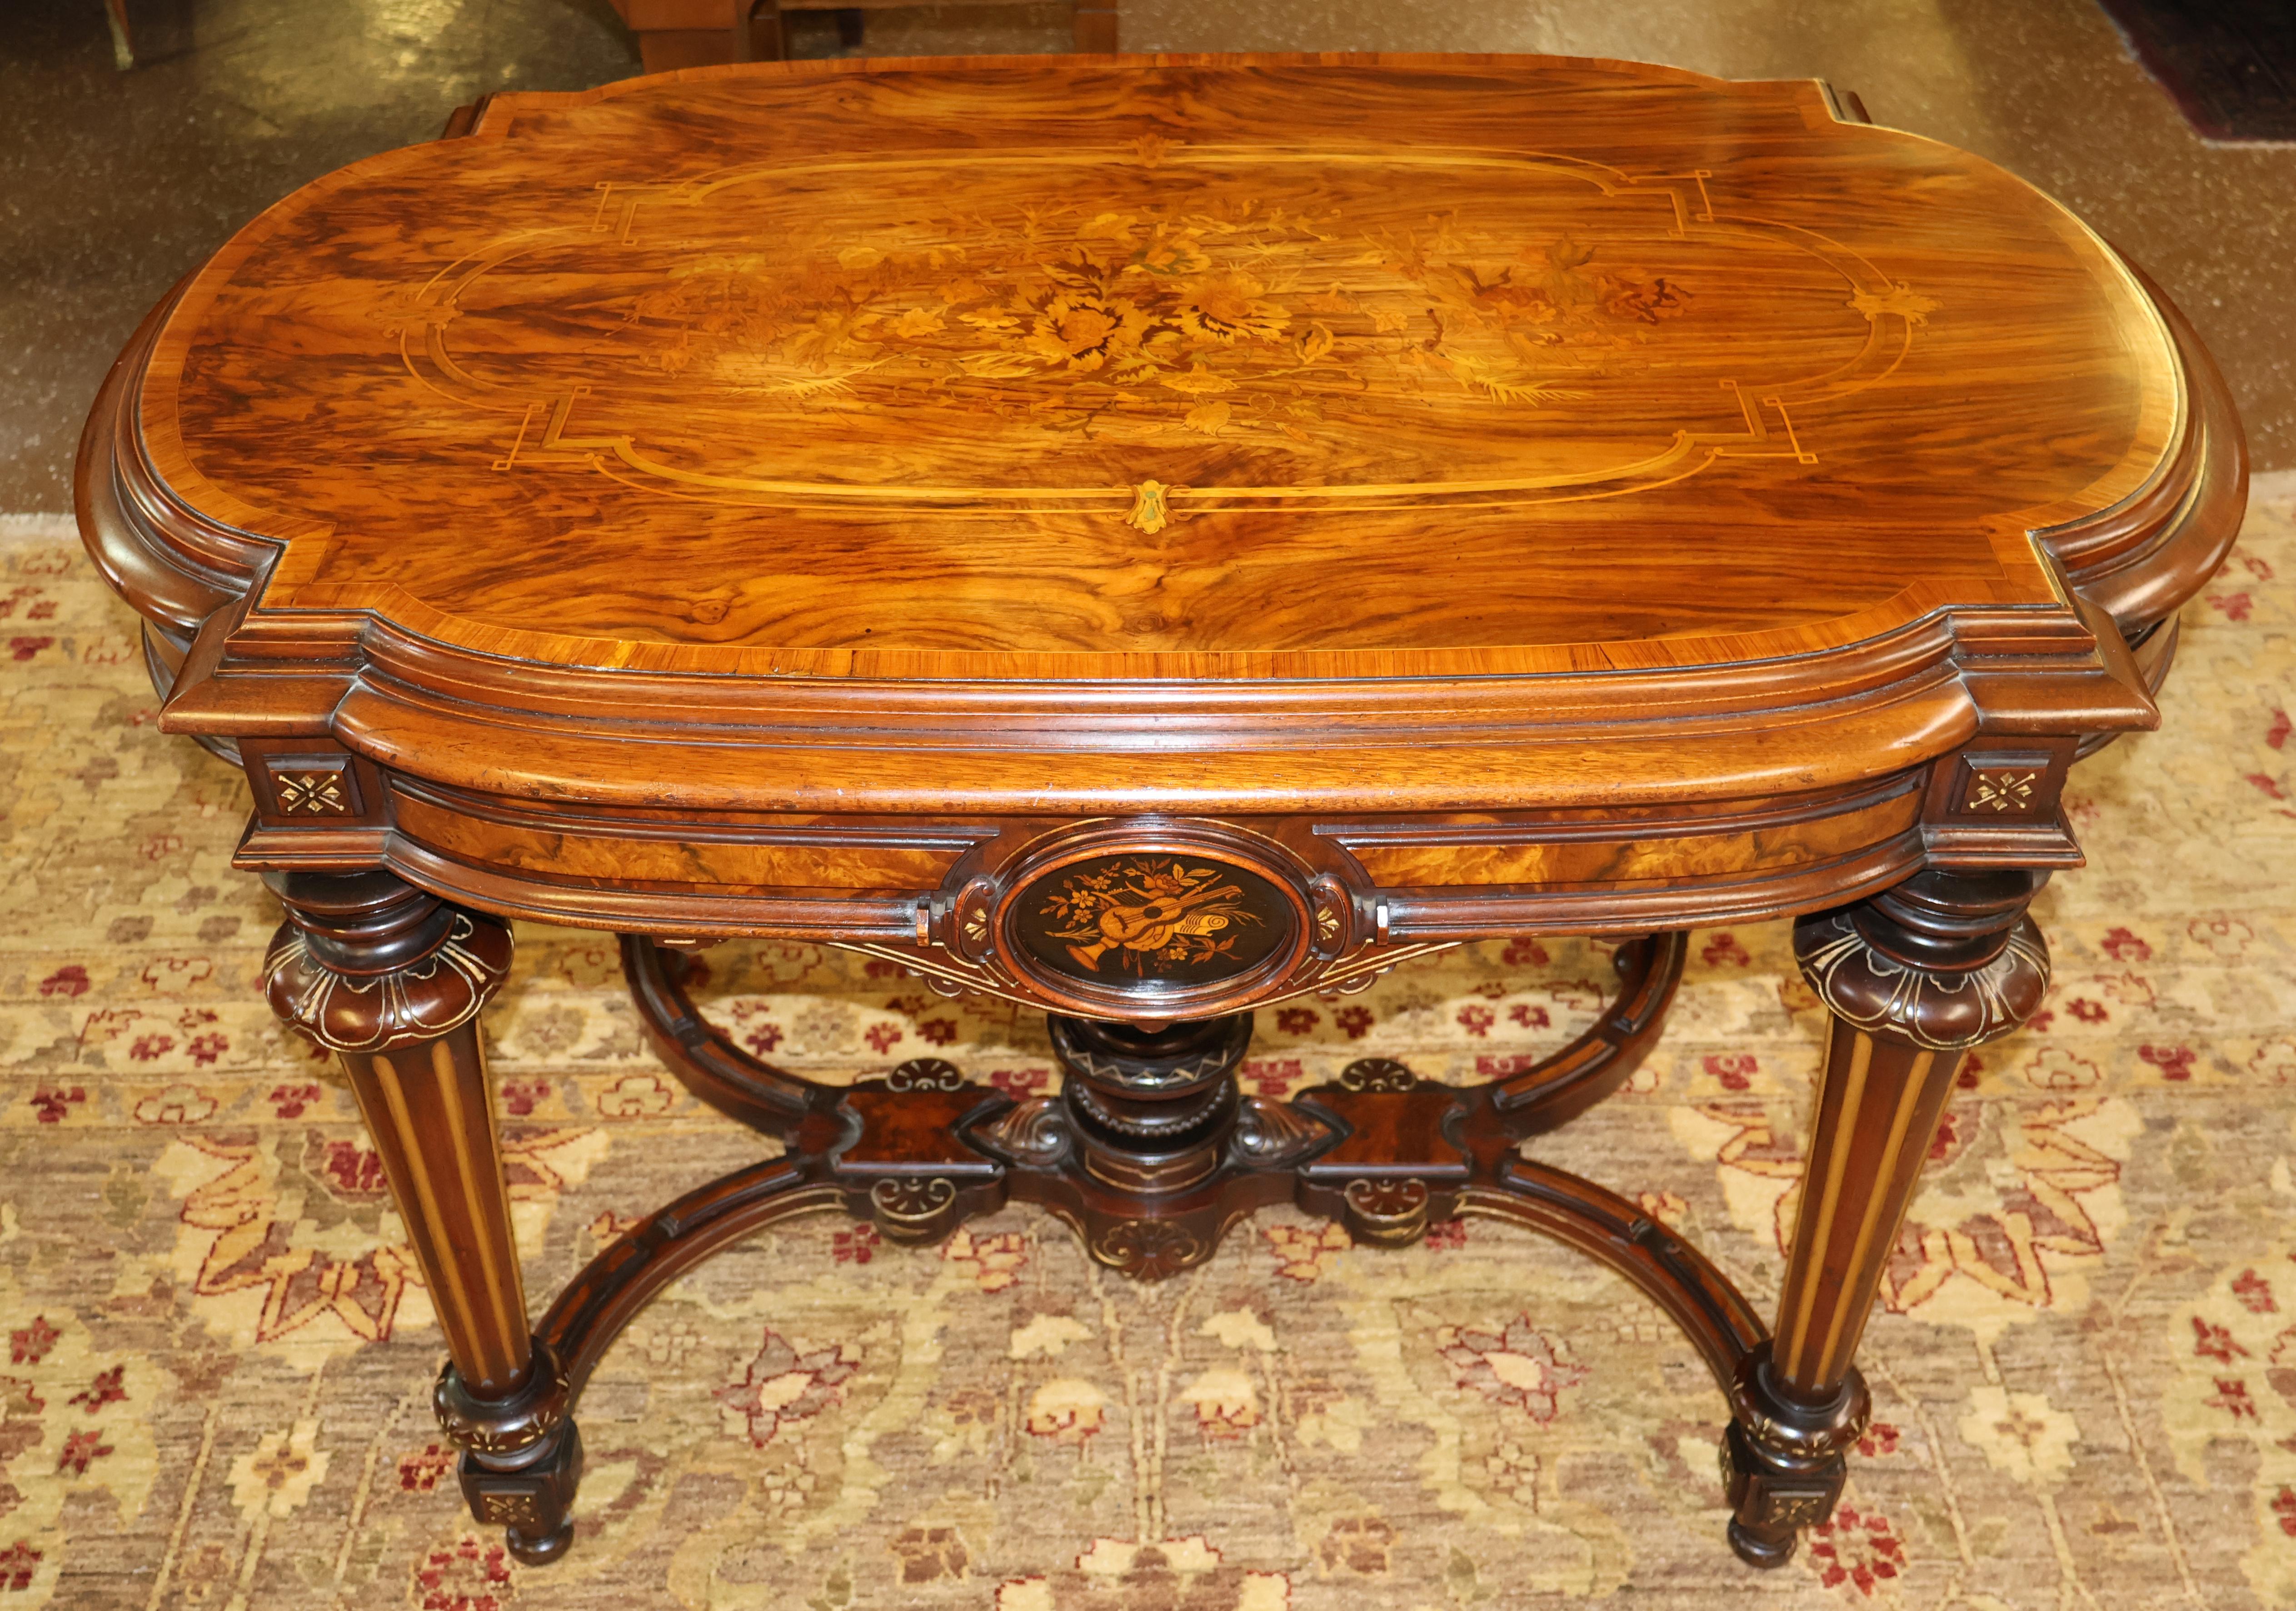 ​19th Century Napoleon III Inlaid Rosewood Occasional Center Entry Table

Dimensions : 29